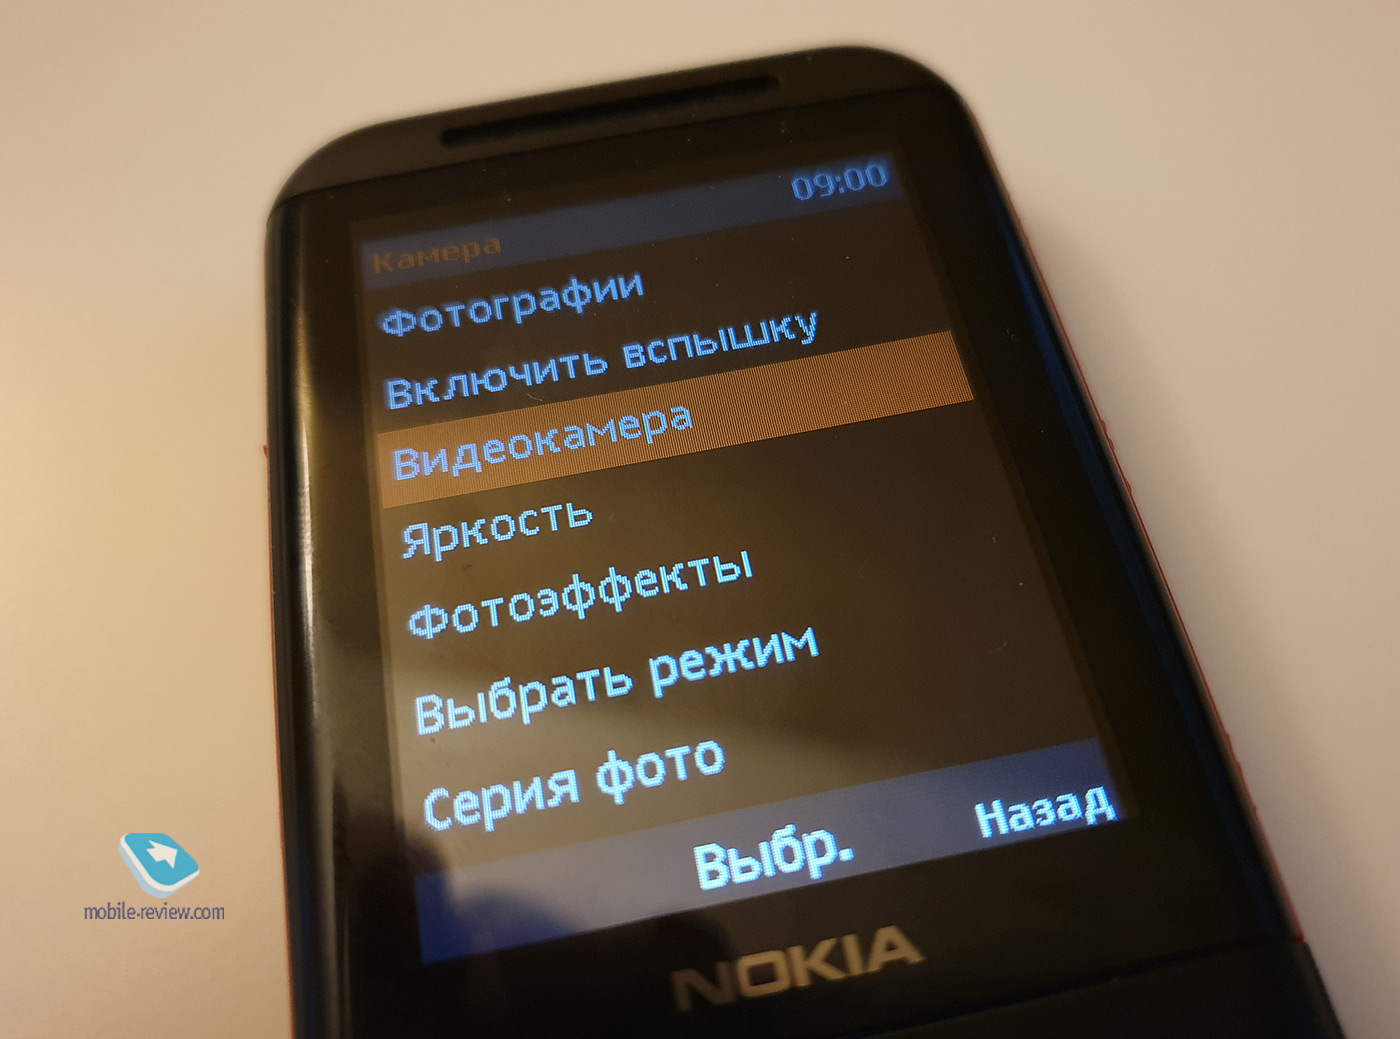 Review of the new Nokia 5310 XpressMusic